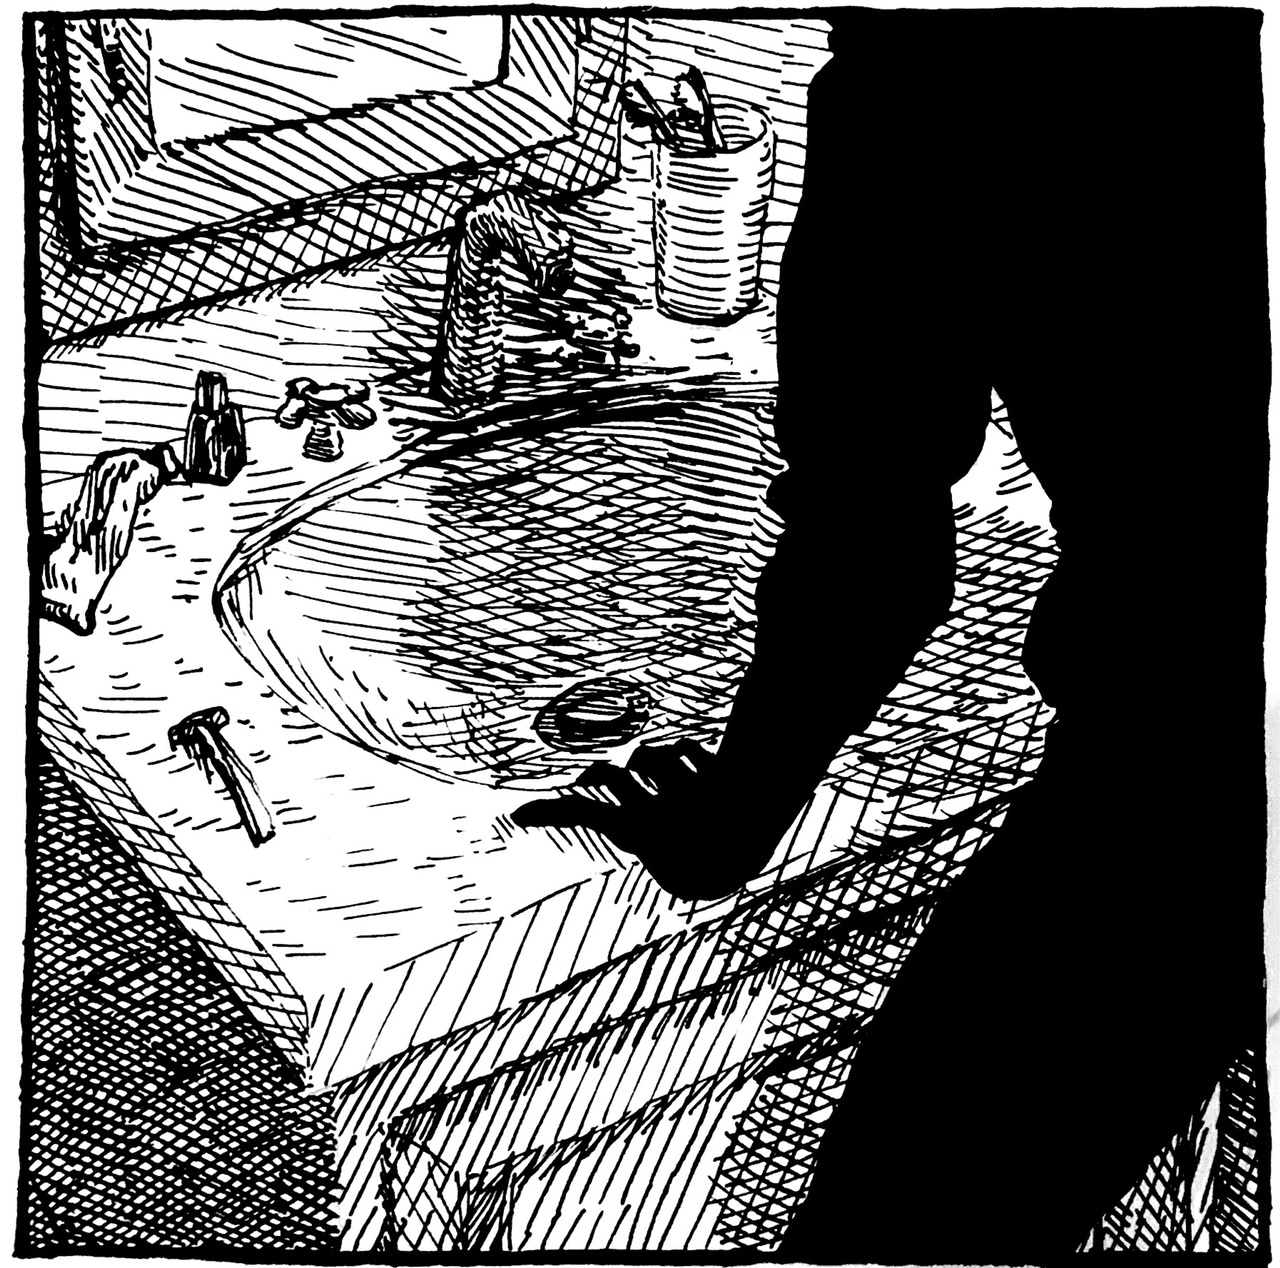 A square pen-and-ink crosshatching illustration of a silhouetted figure leaning over a bathroom sink.